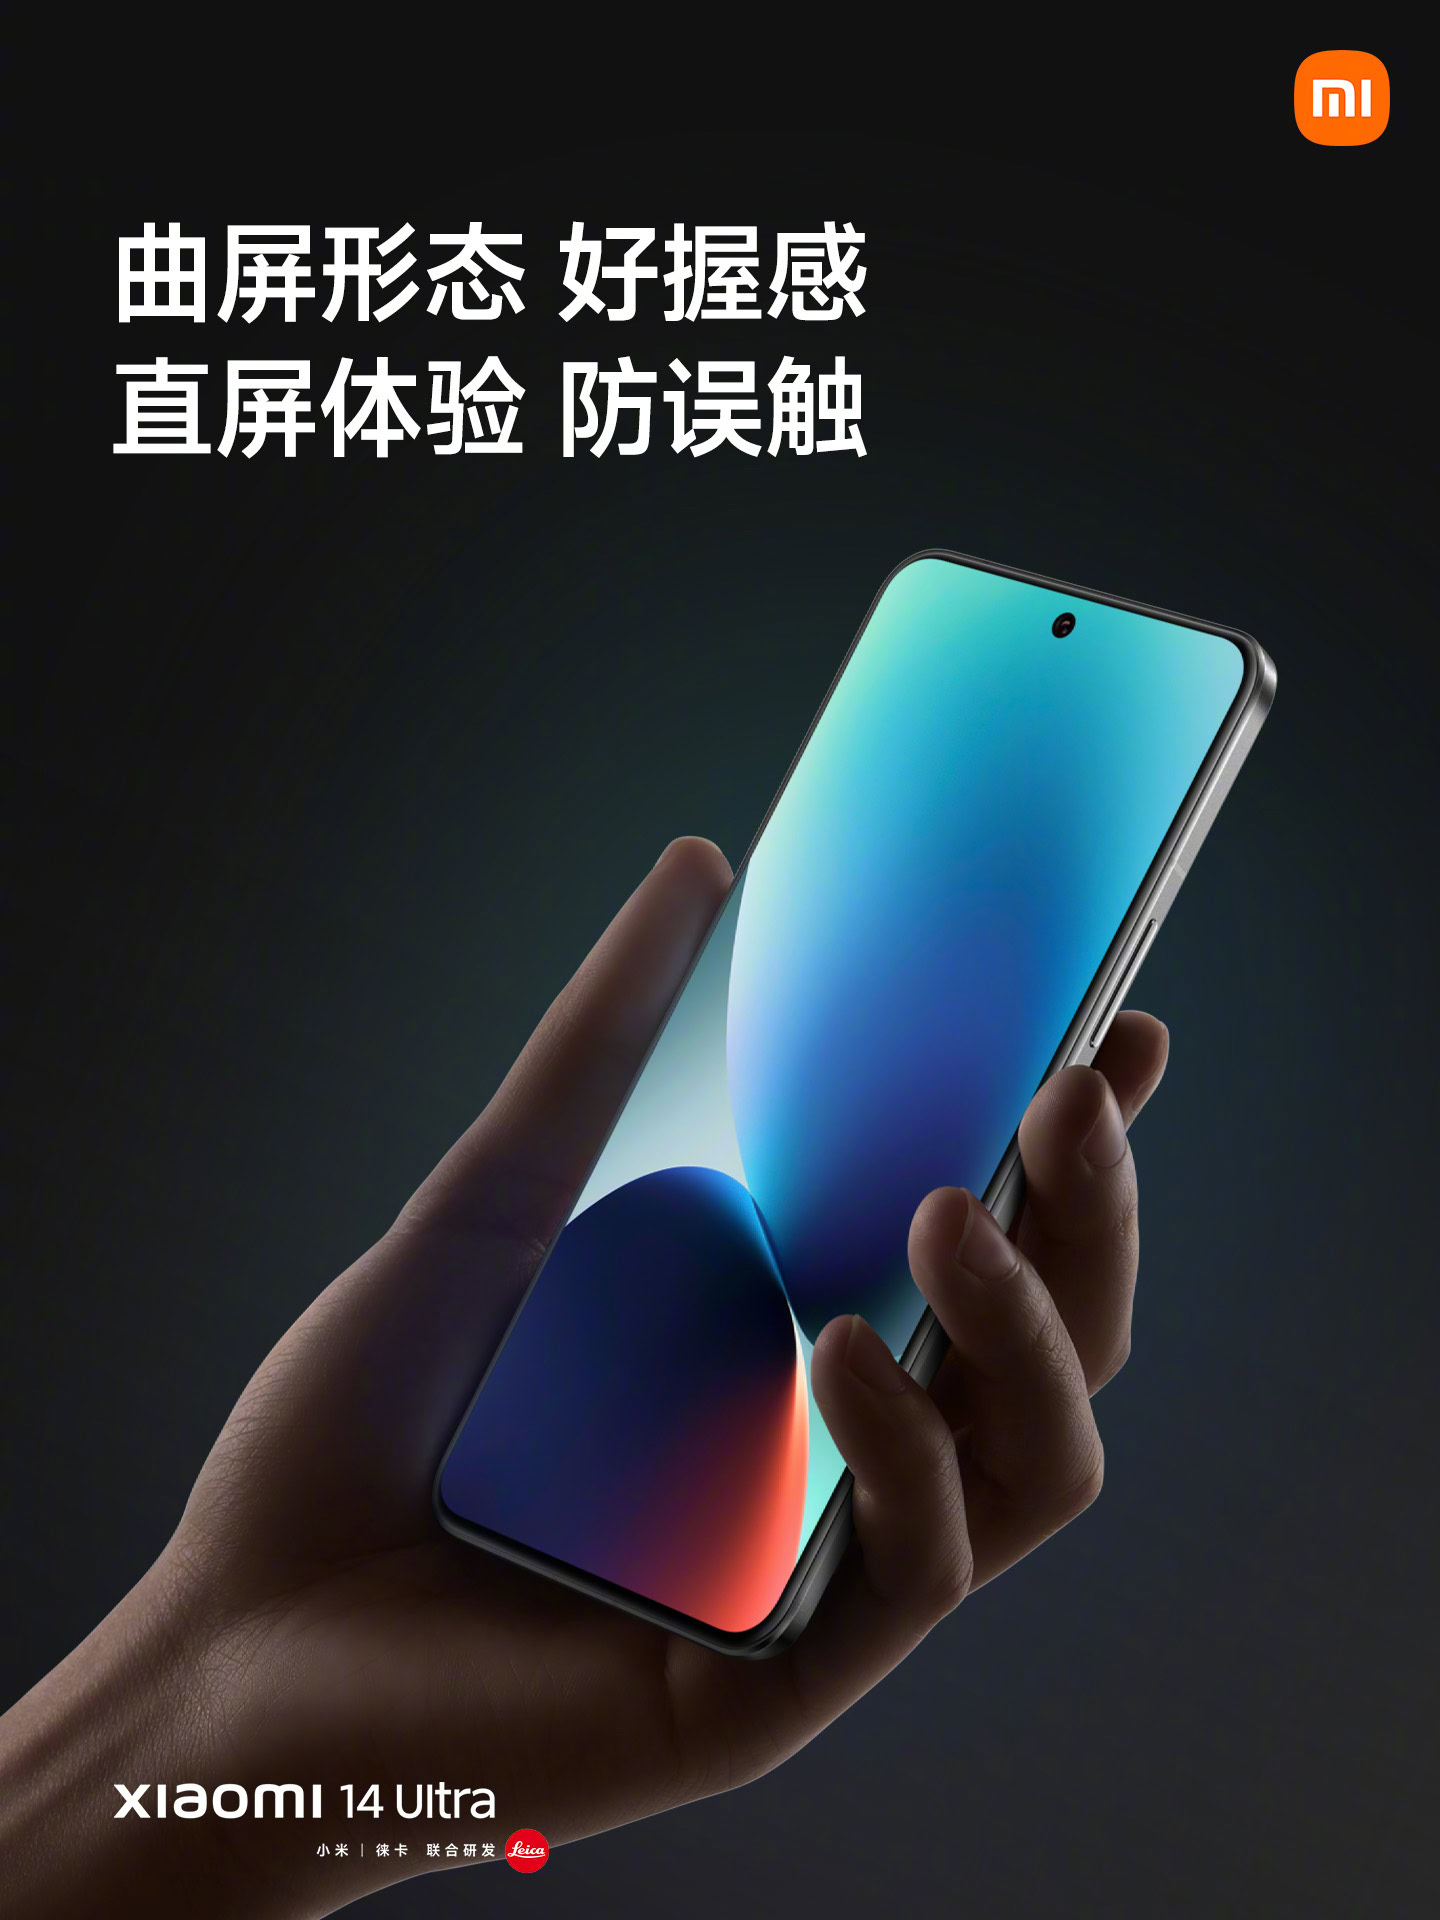 Xiaomi 14 Ultra goes official: A camera disguised as a phone